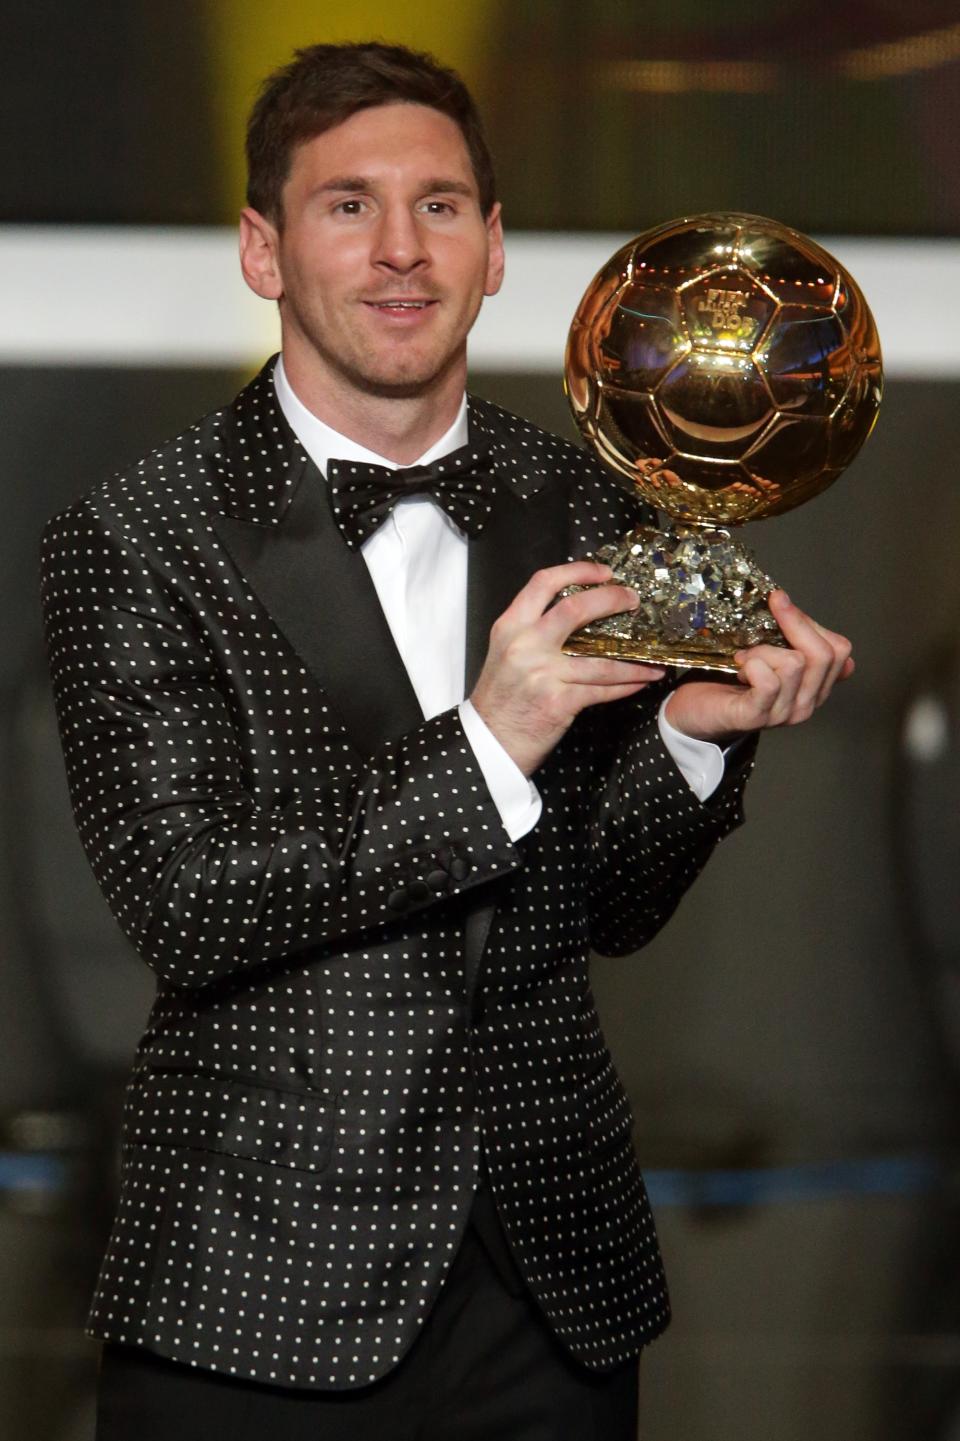 ZURICH, SWITZERLAND - JANUARY 07: Lionel Messi of Argentina receives the FIFA Ballon d'Or 2012 trophy on January 7, 2013 in Zurich, Switzerland. (Photo by Christof Koepsel/Getty Images)